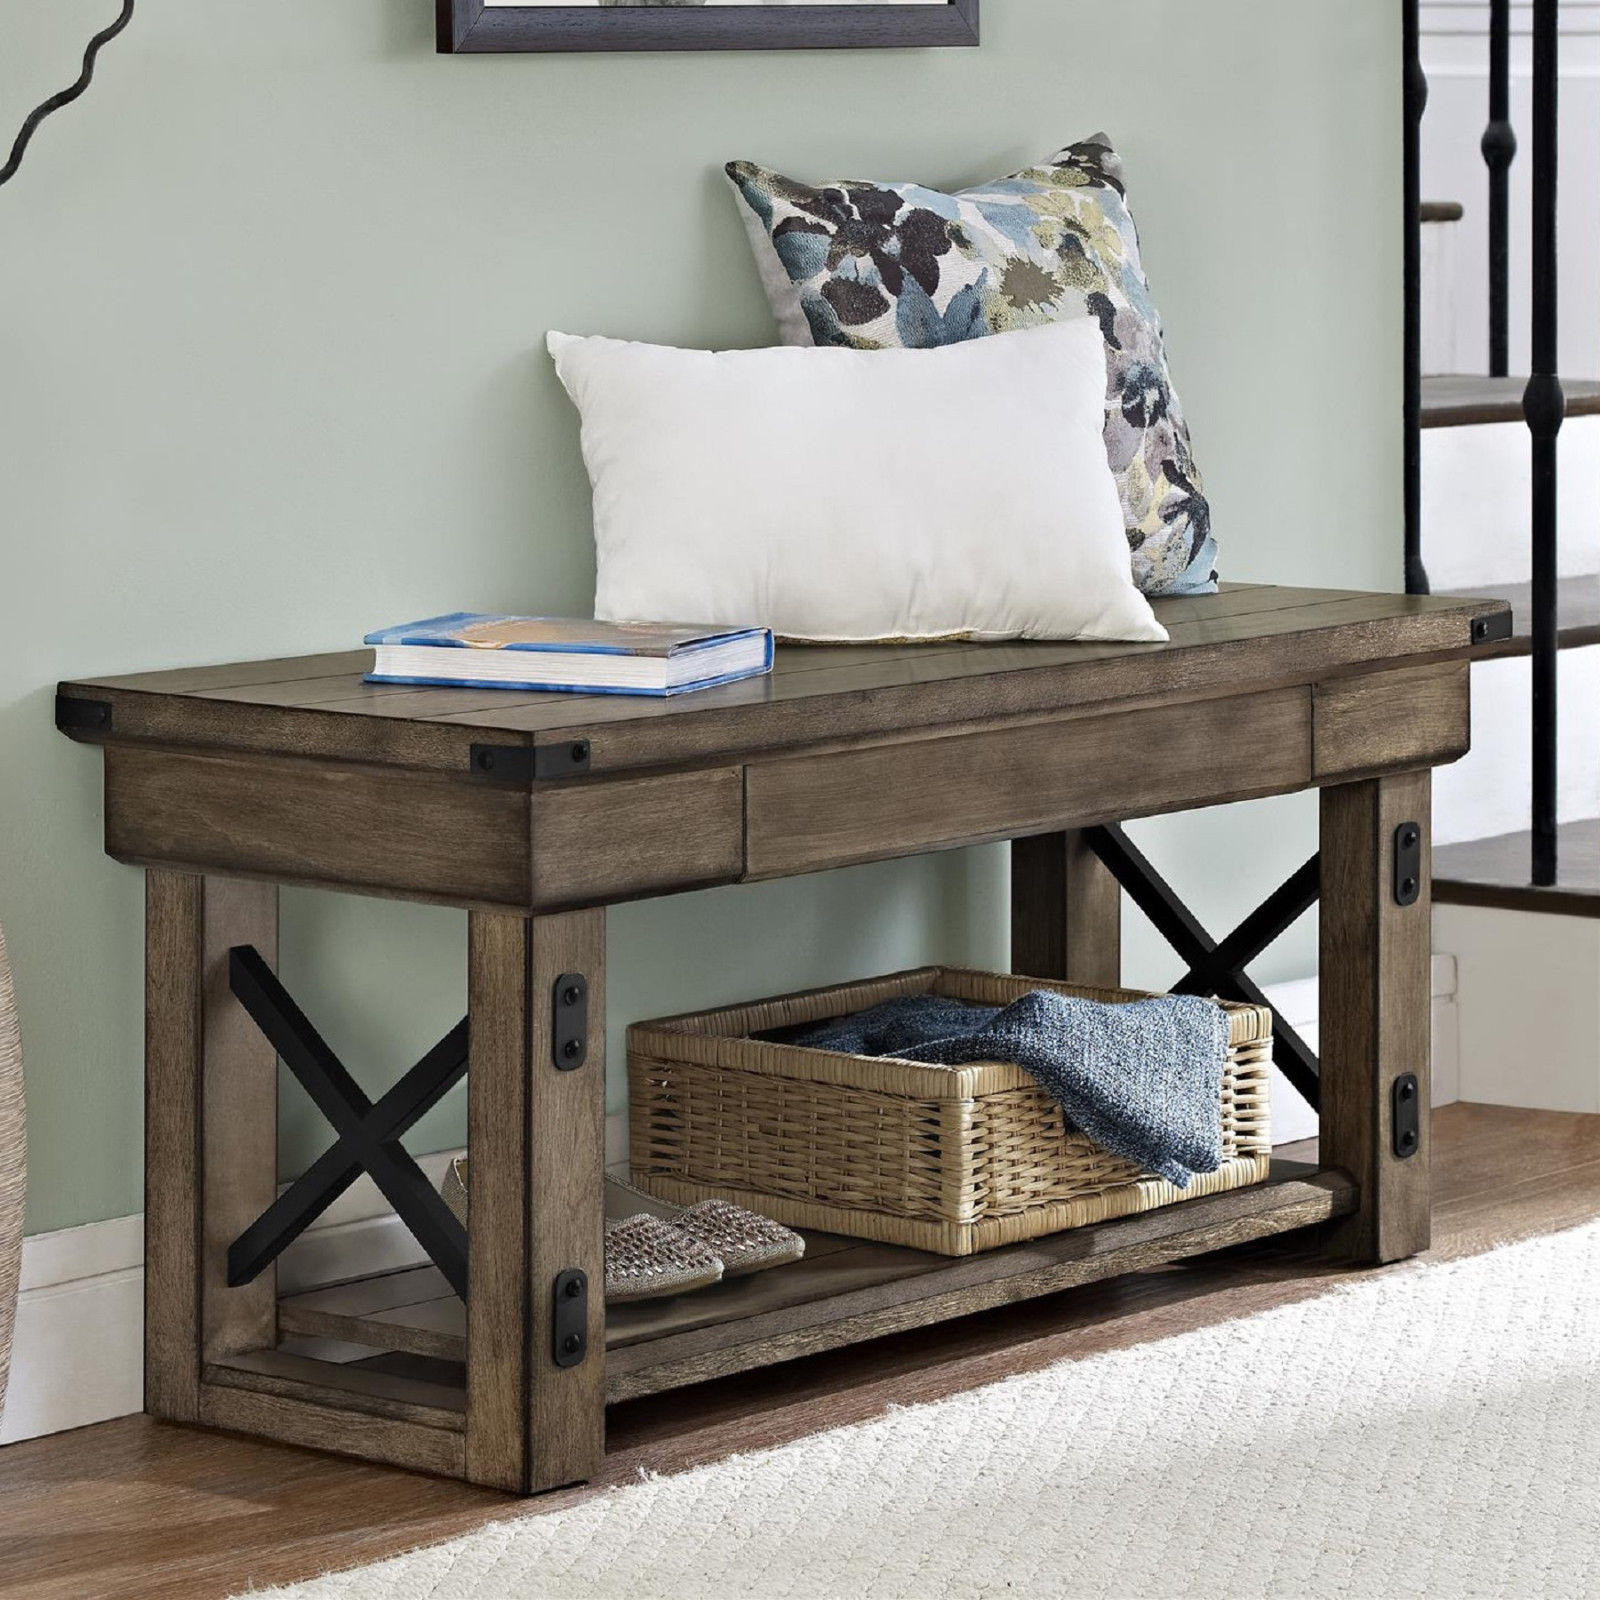 Entry Storage Bench
 Entryway Storage Bench Rustic Hallway from cindictc on eBay